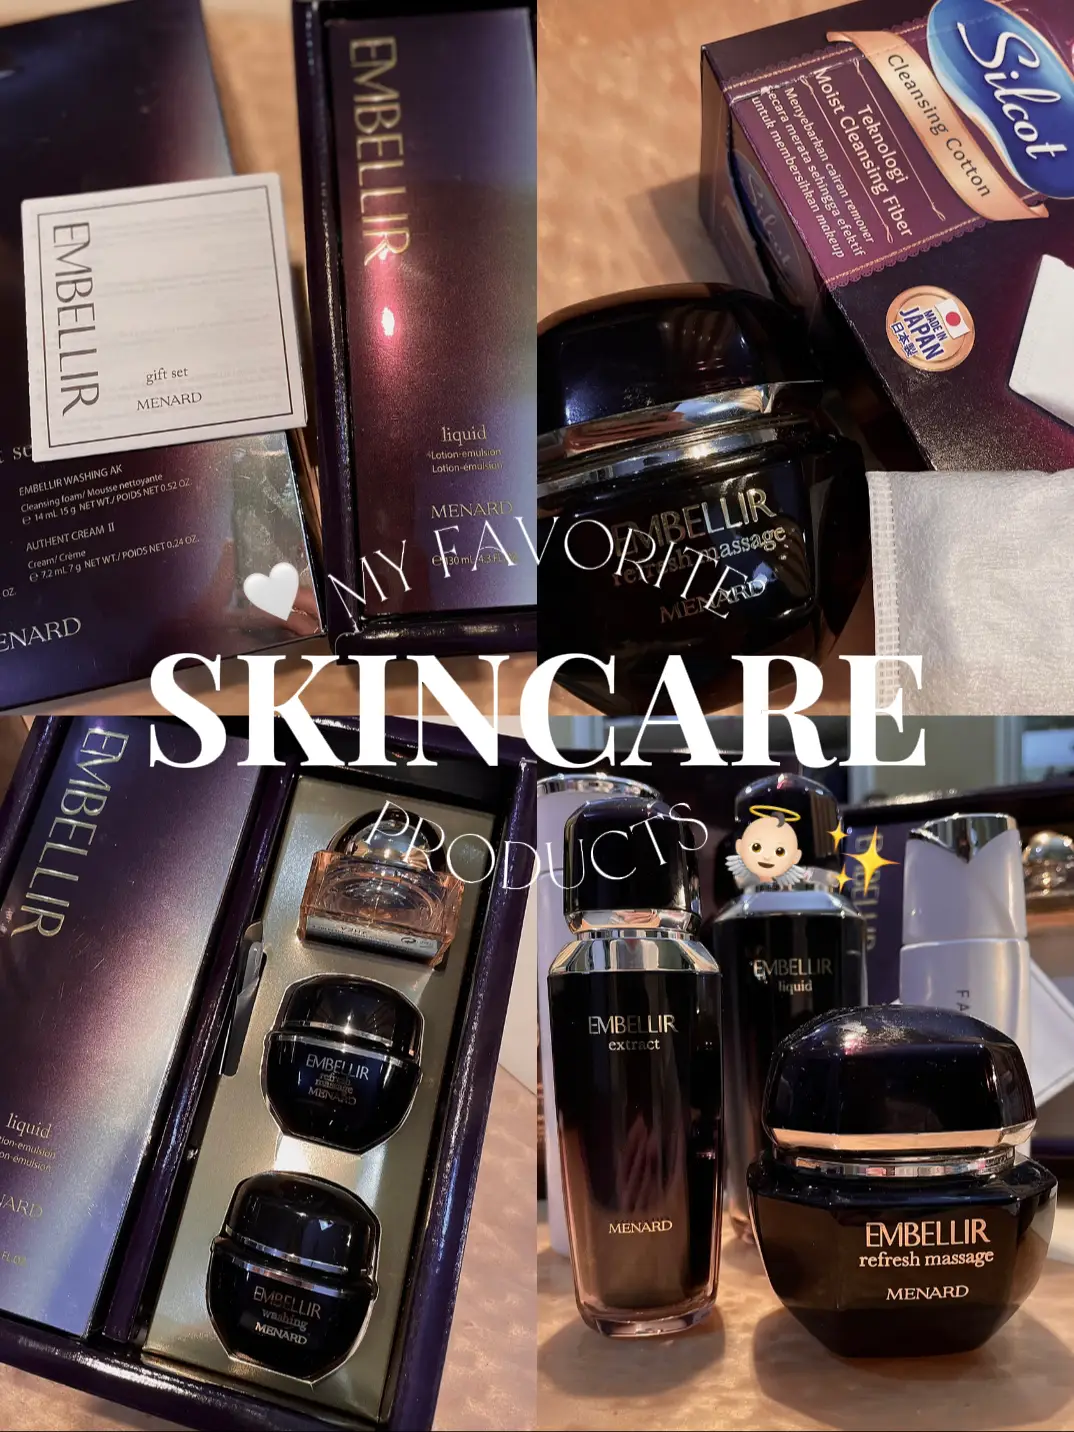 MY FAVORITE SKINCARE PRODUCTS  ‼️ | Gallery posted by Amanda | Lemon8